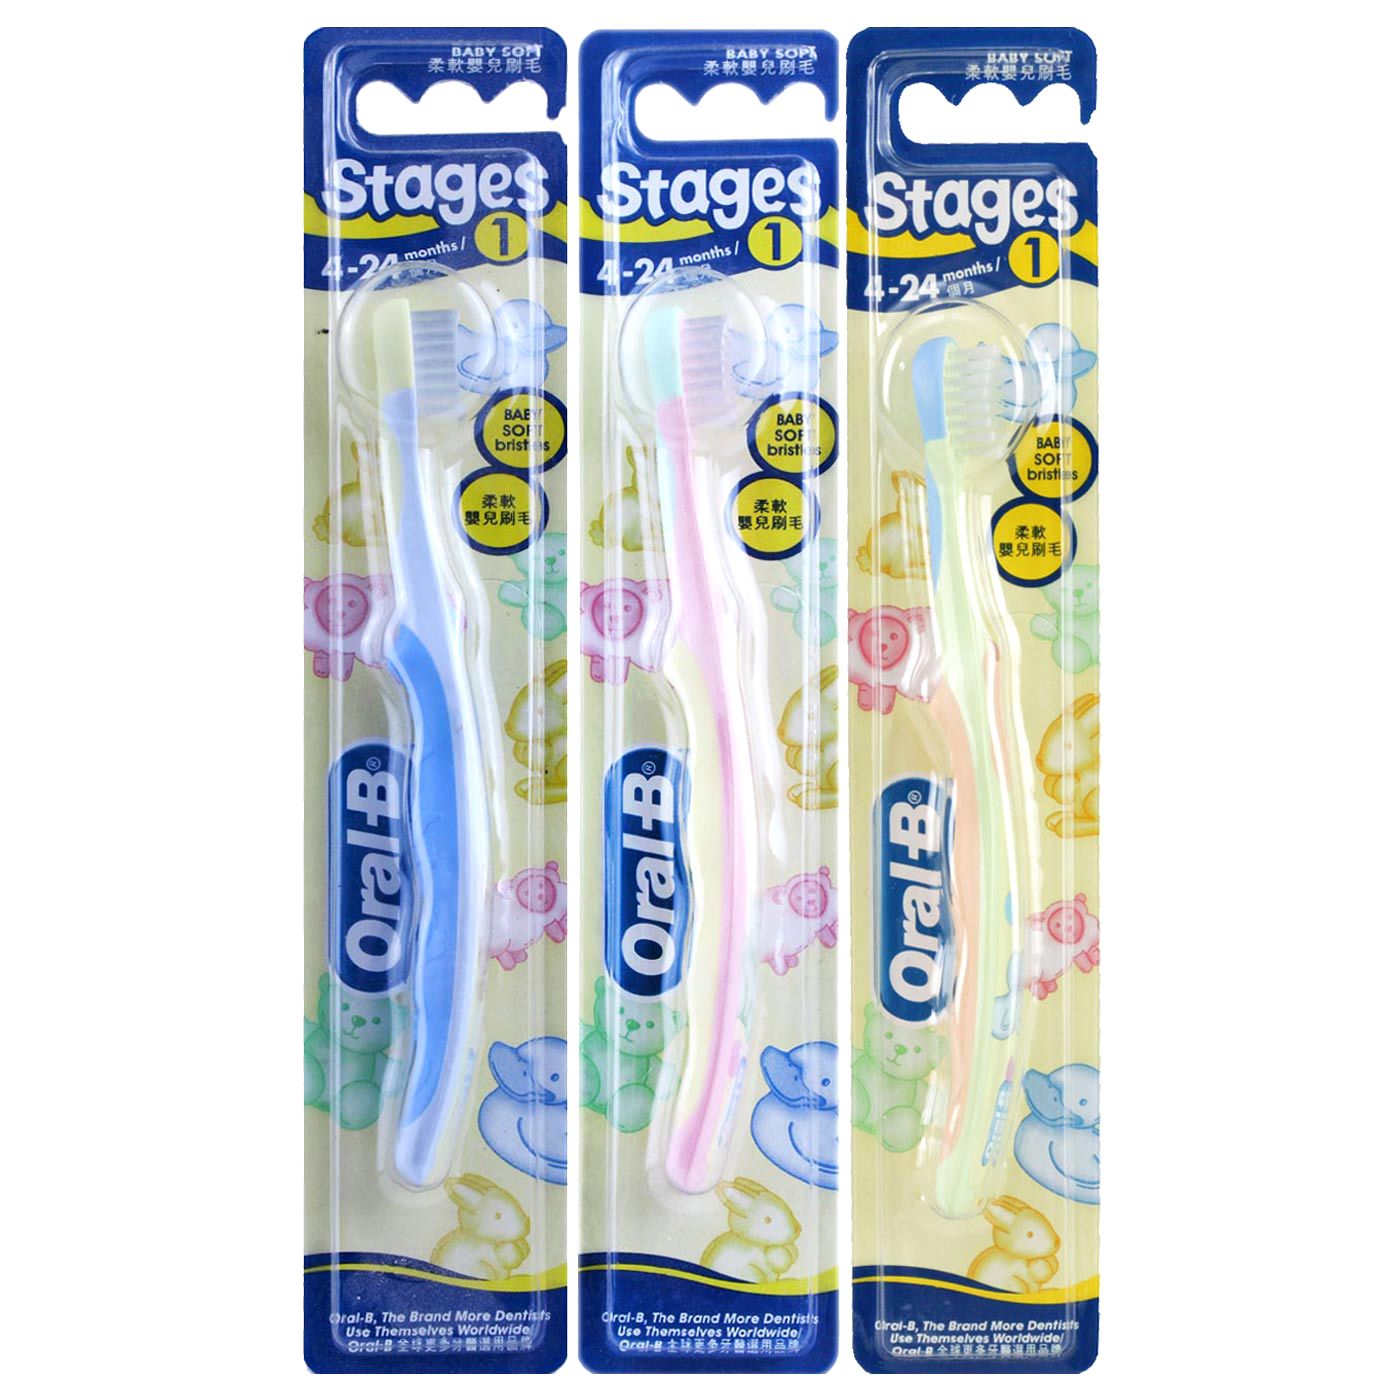 Oral B Kids Sikat Gigi Stages-1 (4-24 months) Baby Soft - 1